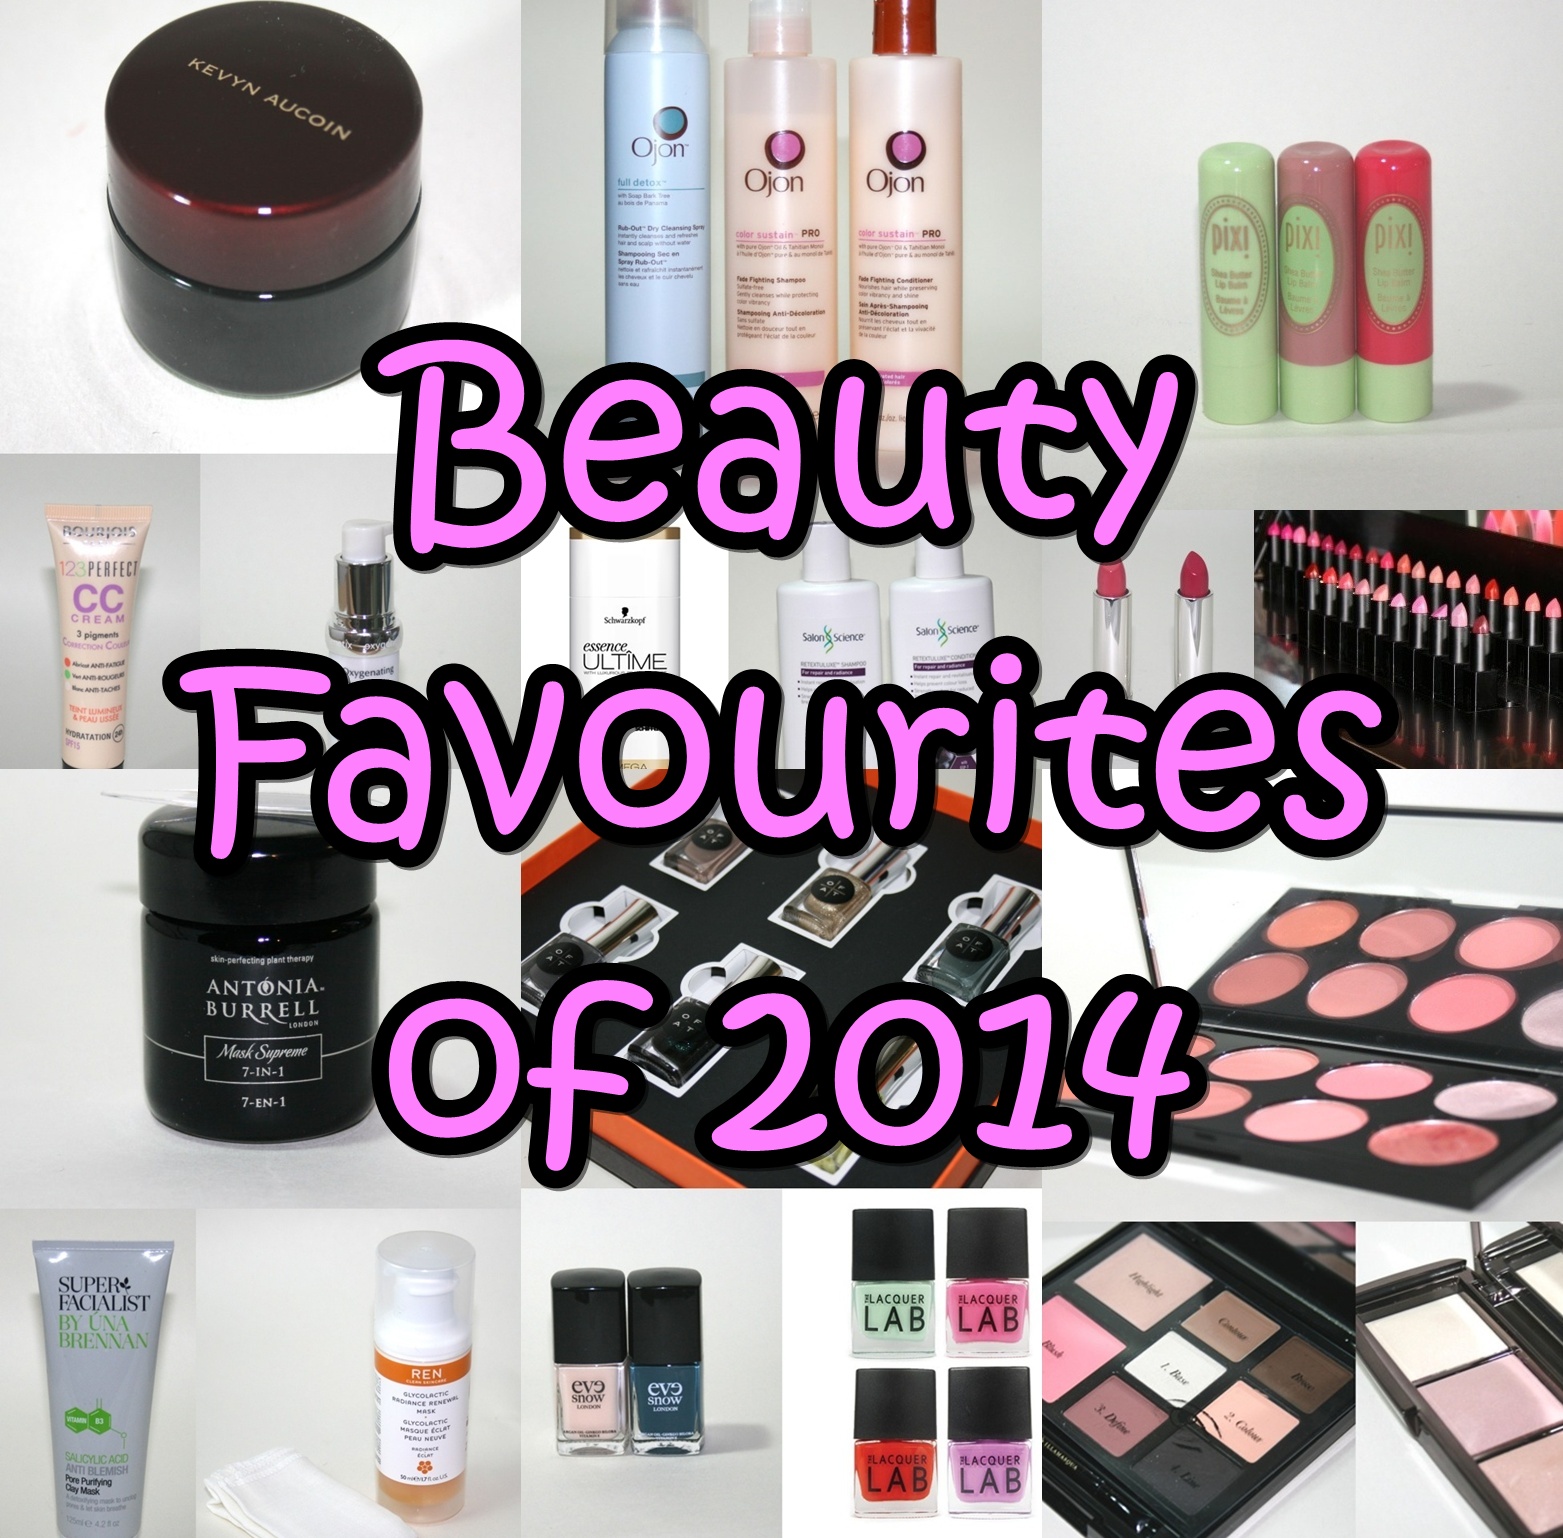 Favourite Beauty Products of 2014